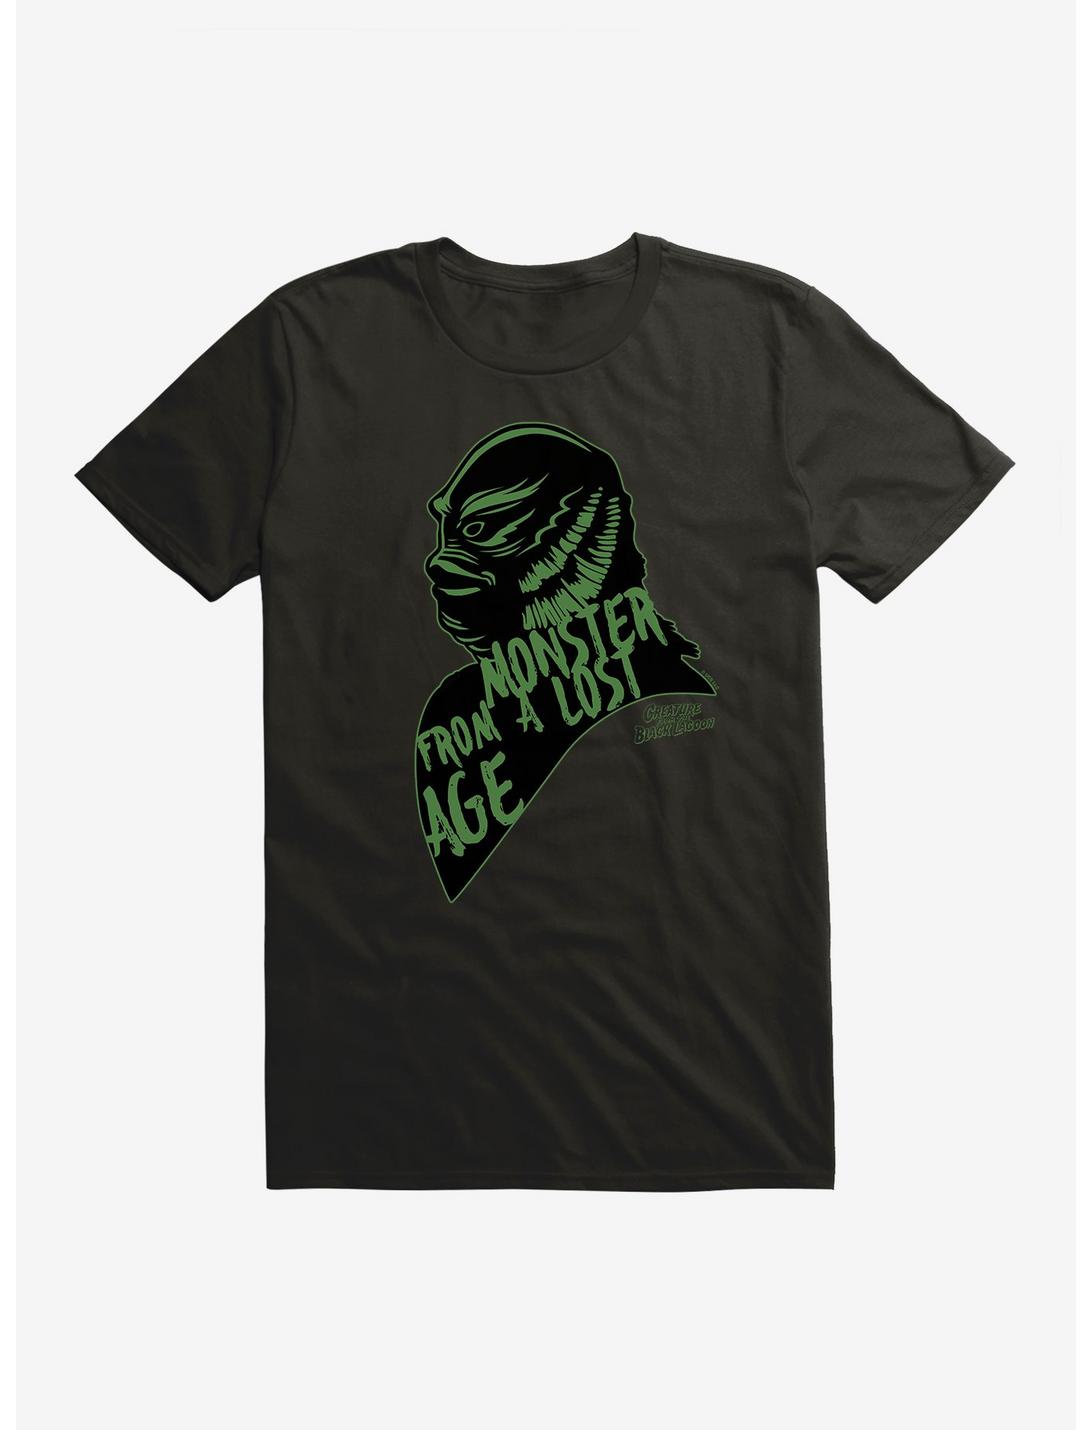 Universal Monsters Creature From The Black Lagoon Monster From A Lost Age T-Shirt, , hi-res